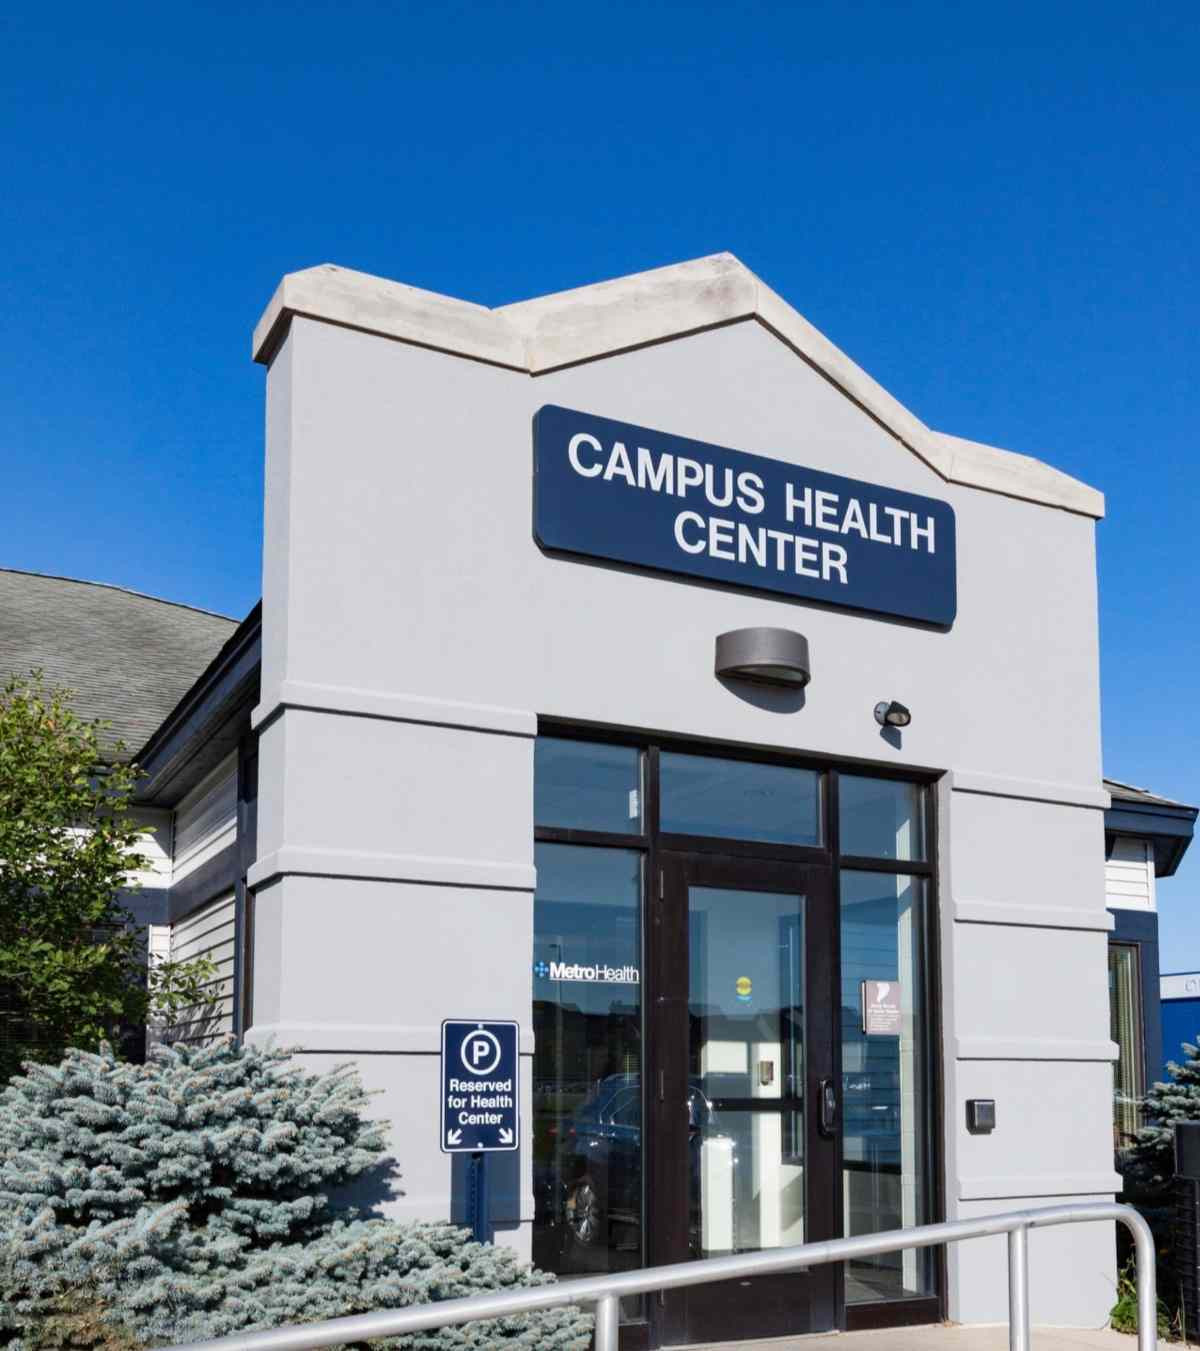 the outside front door of the campus health center